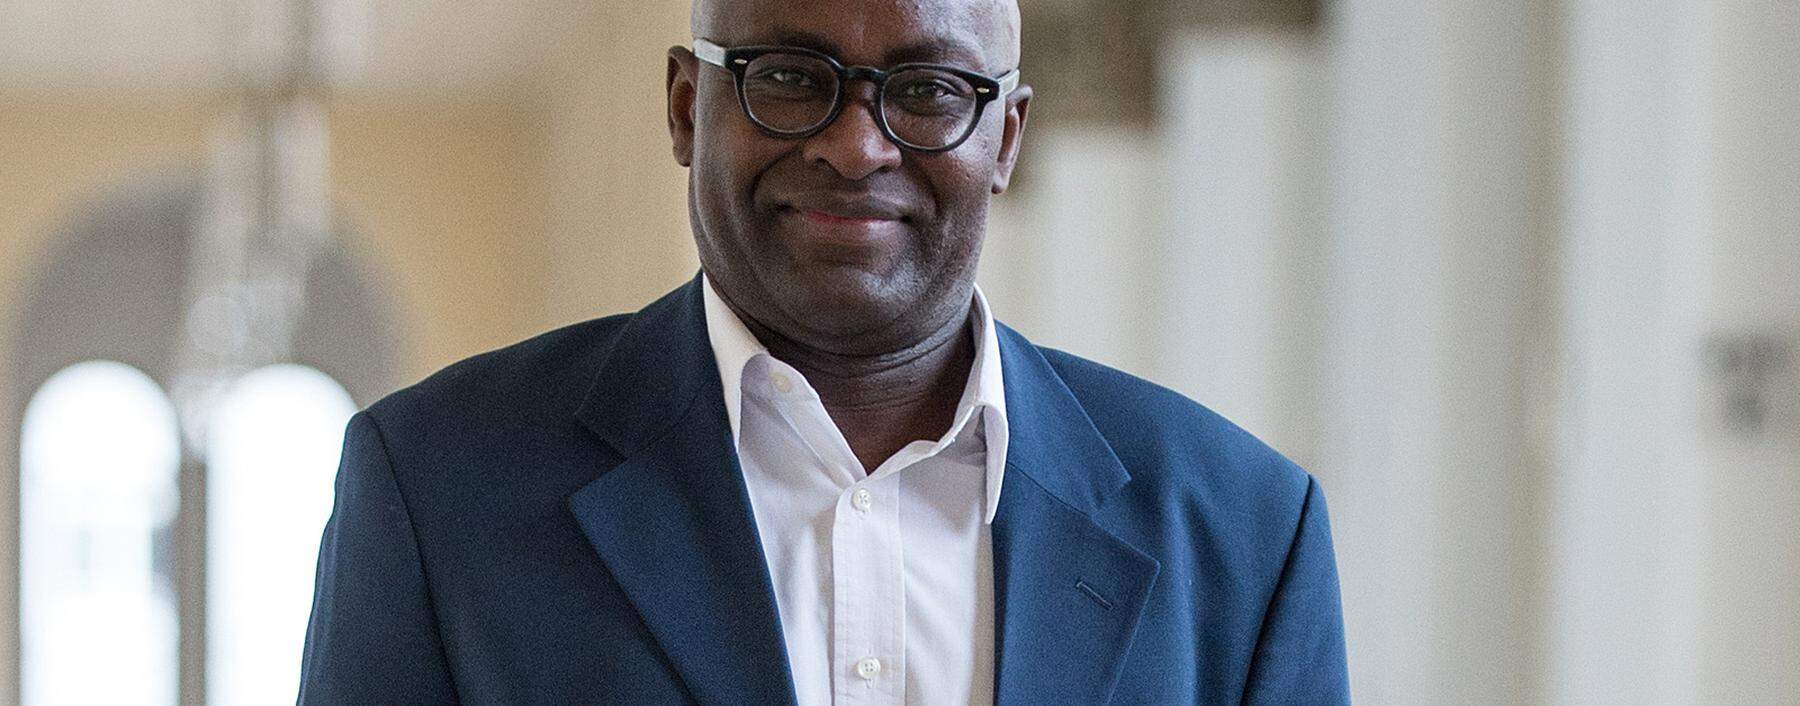 Achille Mbembe receives Geschwister Scholl Prize